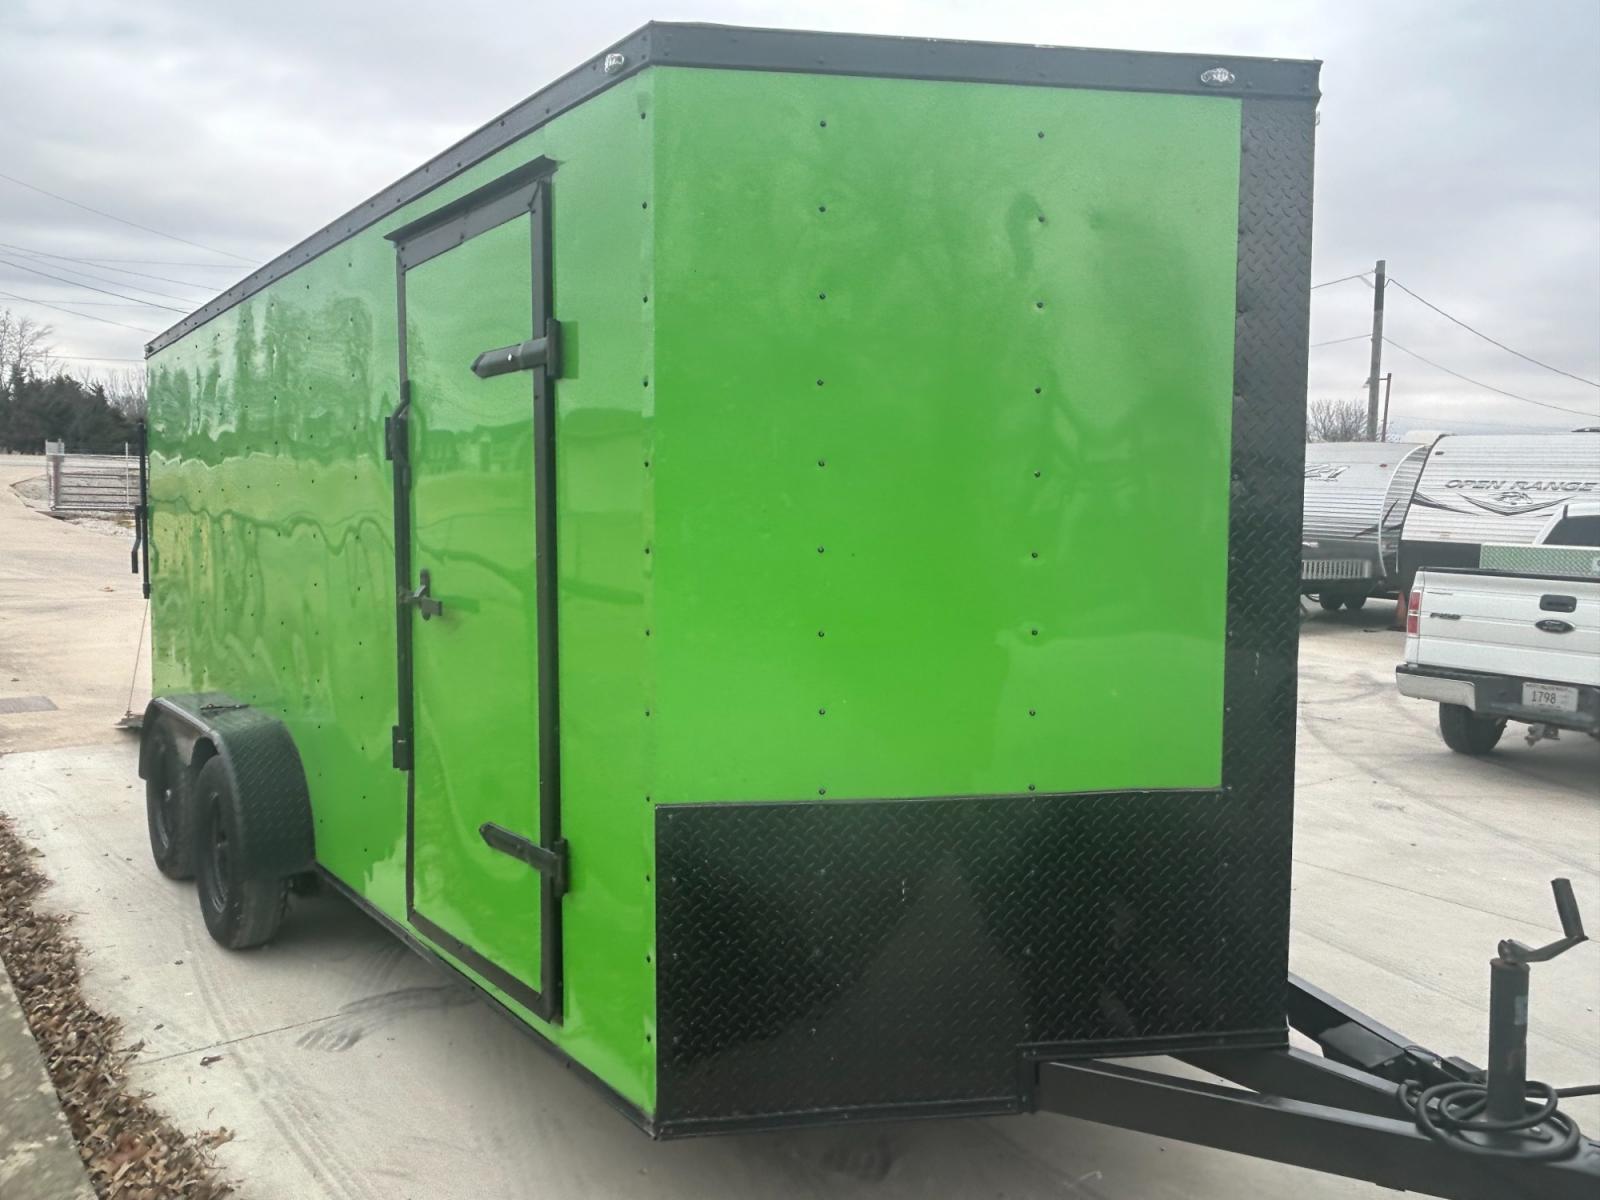 2020 GREEN /TAN DEEP SOUTH ENCLOSED TRAILER (7JKBE1624LH) , located at 17760 Hwy 62, Morris, OK, 74445, 35.609104, -95.877060 - 2020 DEEP SOUTH ENCLOSED TRAILER. THIS TRAILER IS 12 X 6.5 FT. ***MINOR DAMAGES AS SHOWN IN PICTURES*** ***WE RECOMMEND THAT THE TIRES TO BE REPLACED*** WE CAN REPLACE THE TIRES FOR AN ADDITIONAL $400 $5,500 - Photo #0